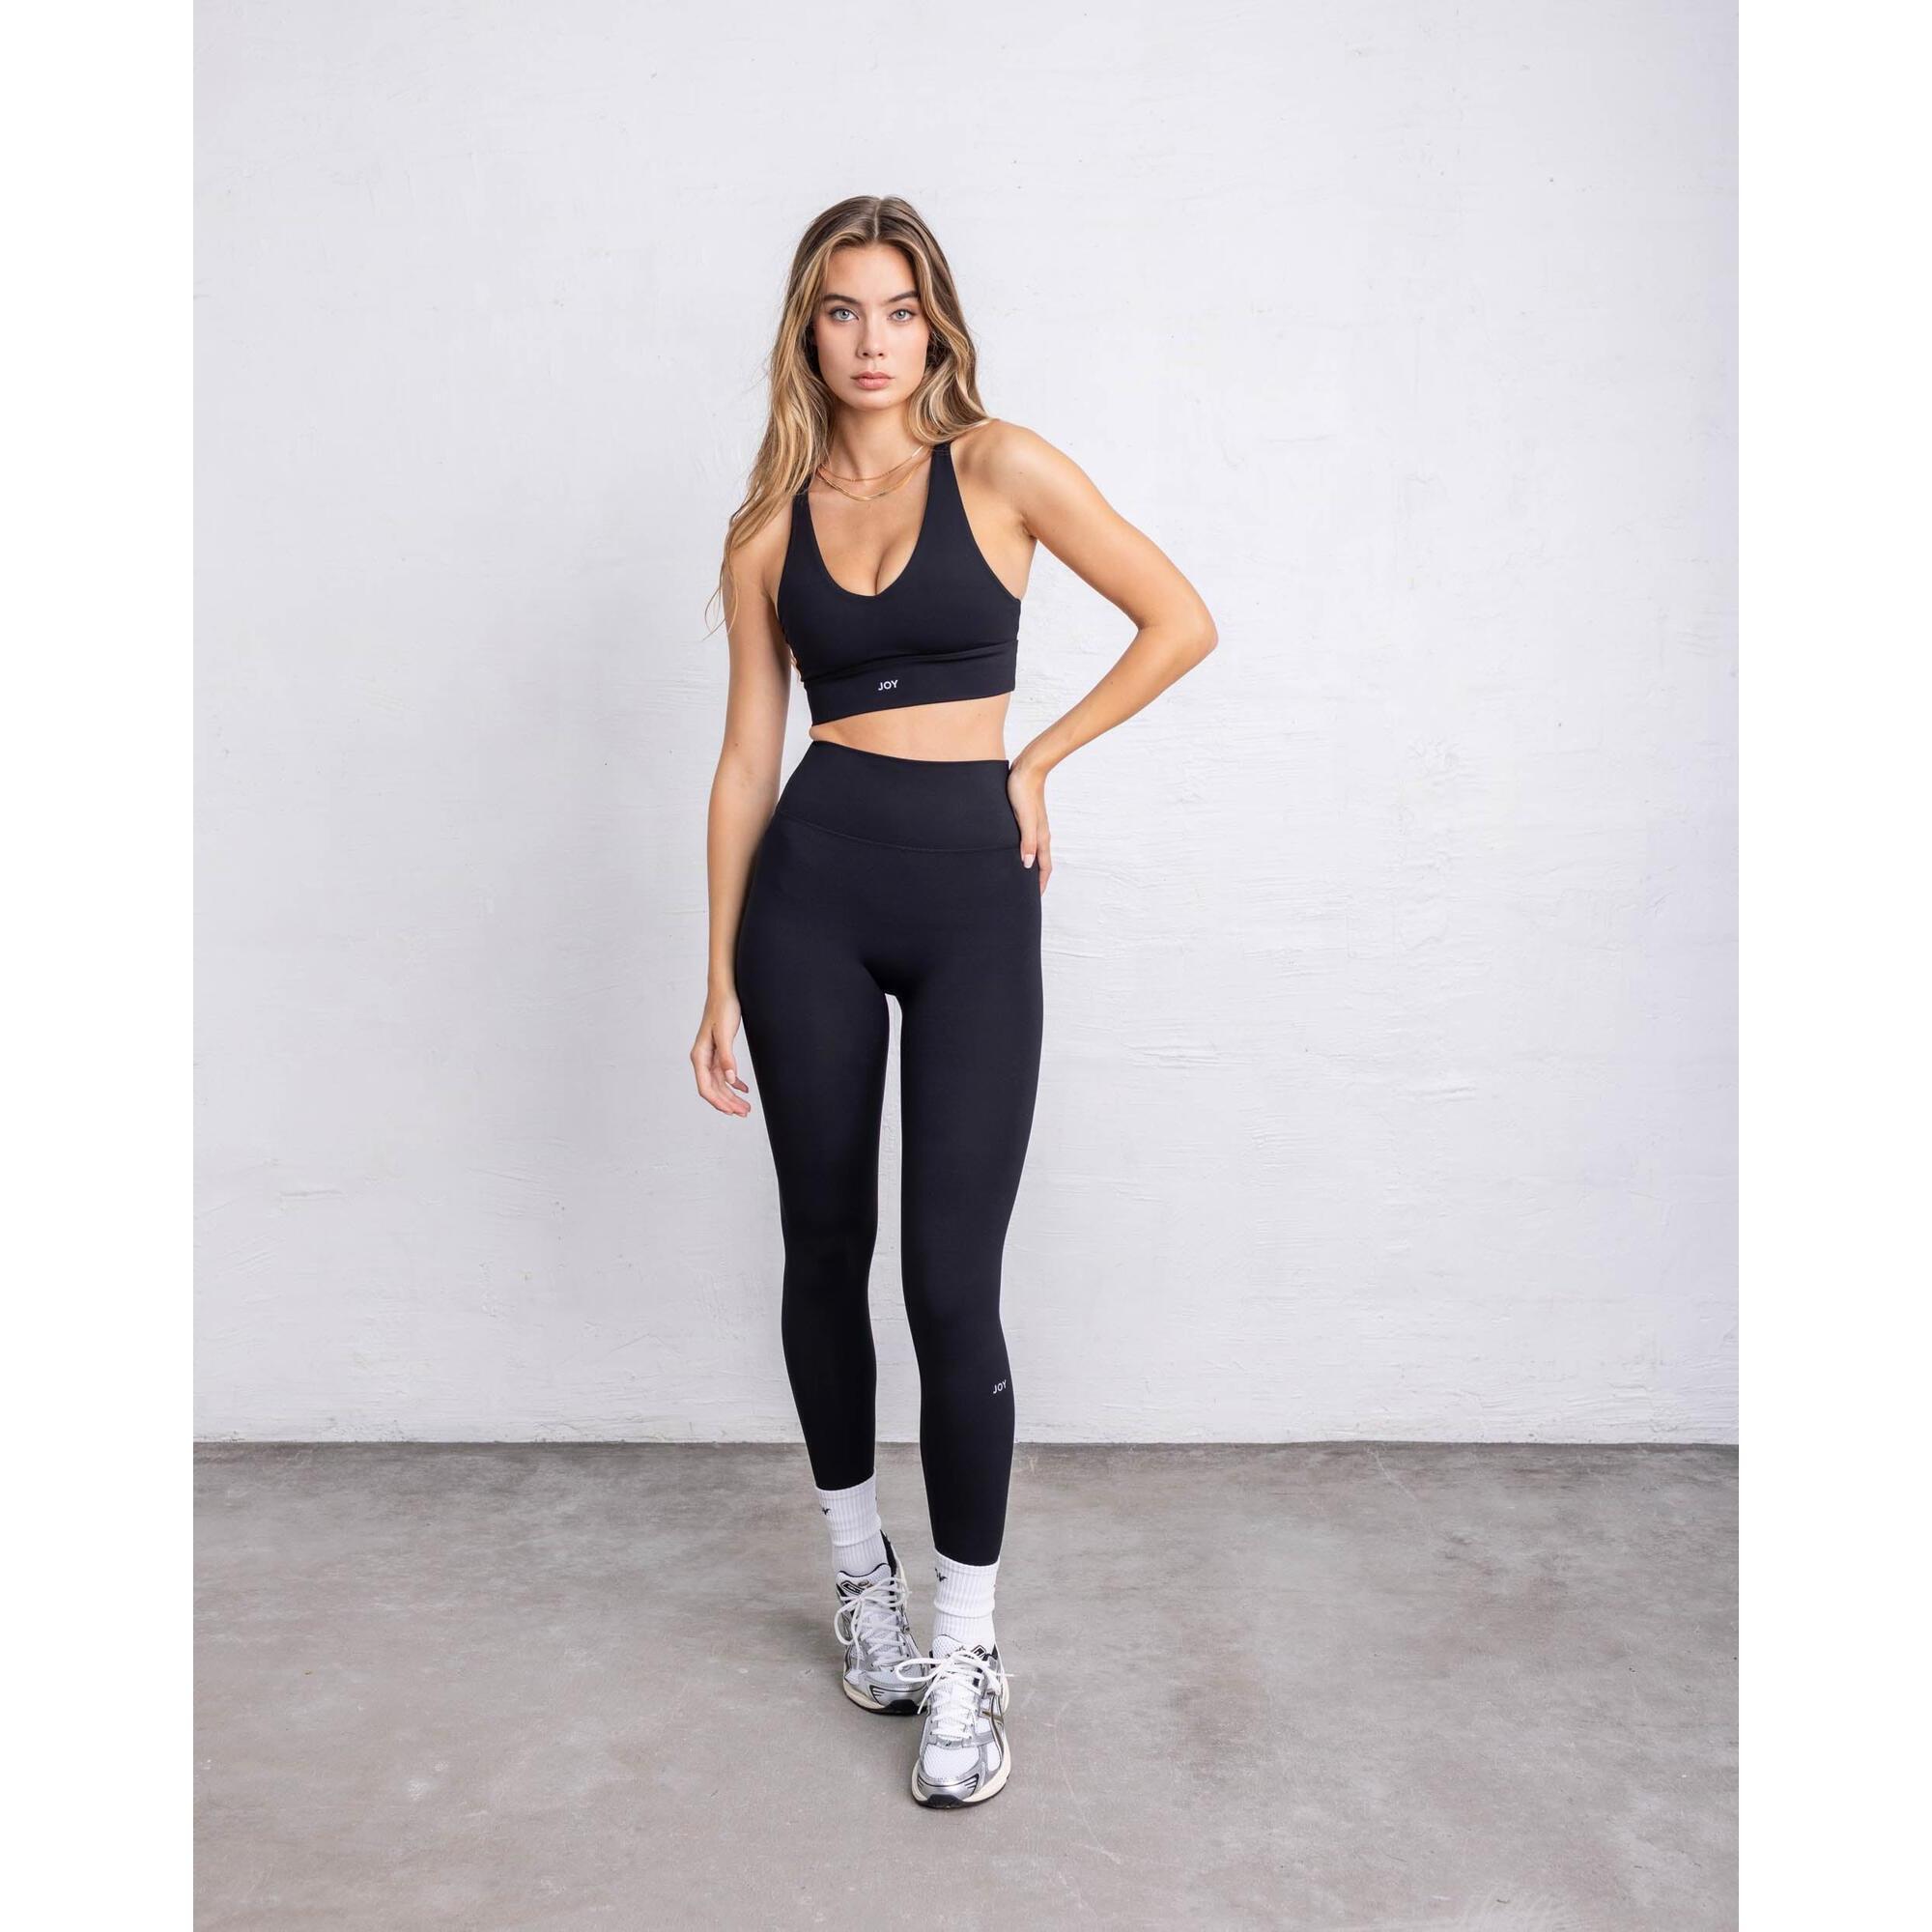 Fitness Workout Leggings | Black and white pants, Printed sports leggings,  Workout leggings